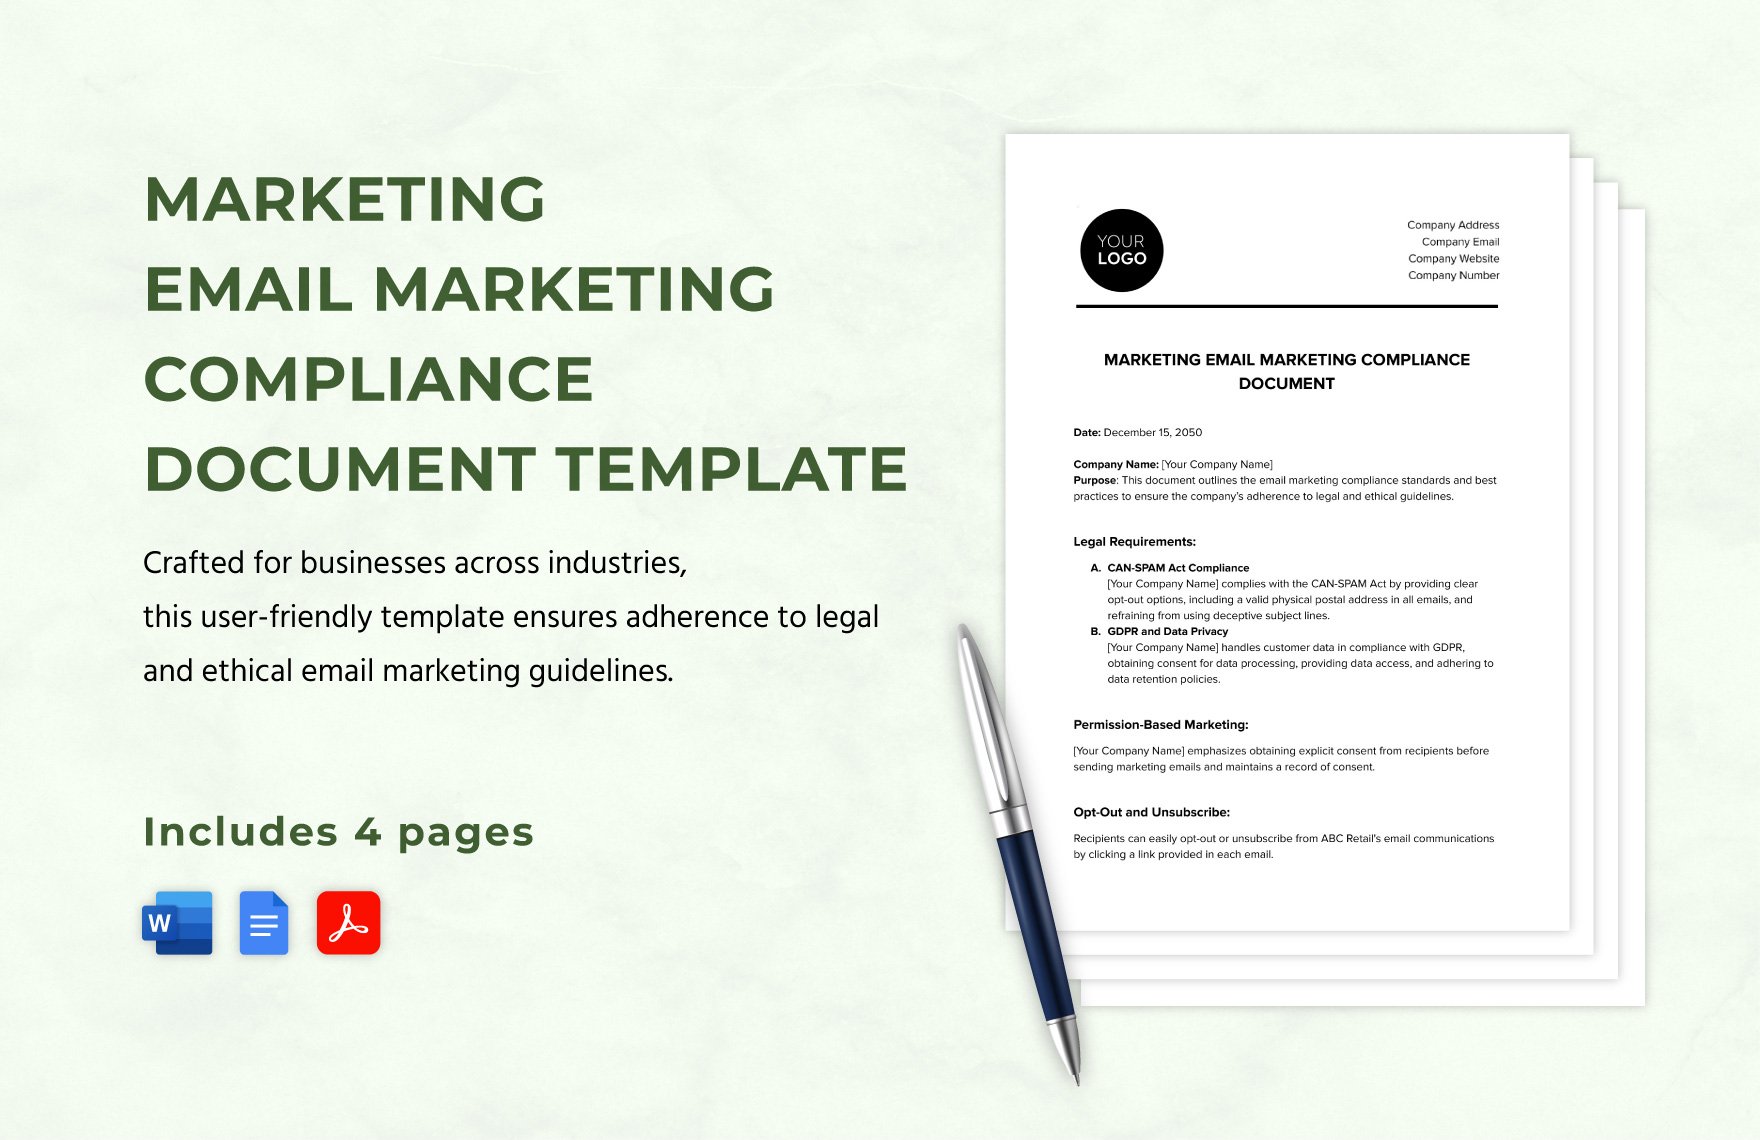 Marketing Email Marketing Compliance Document Template in Word, Google Docs, PDF